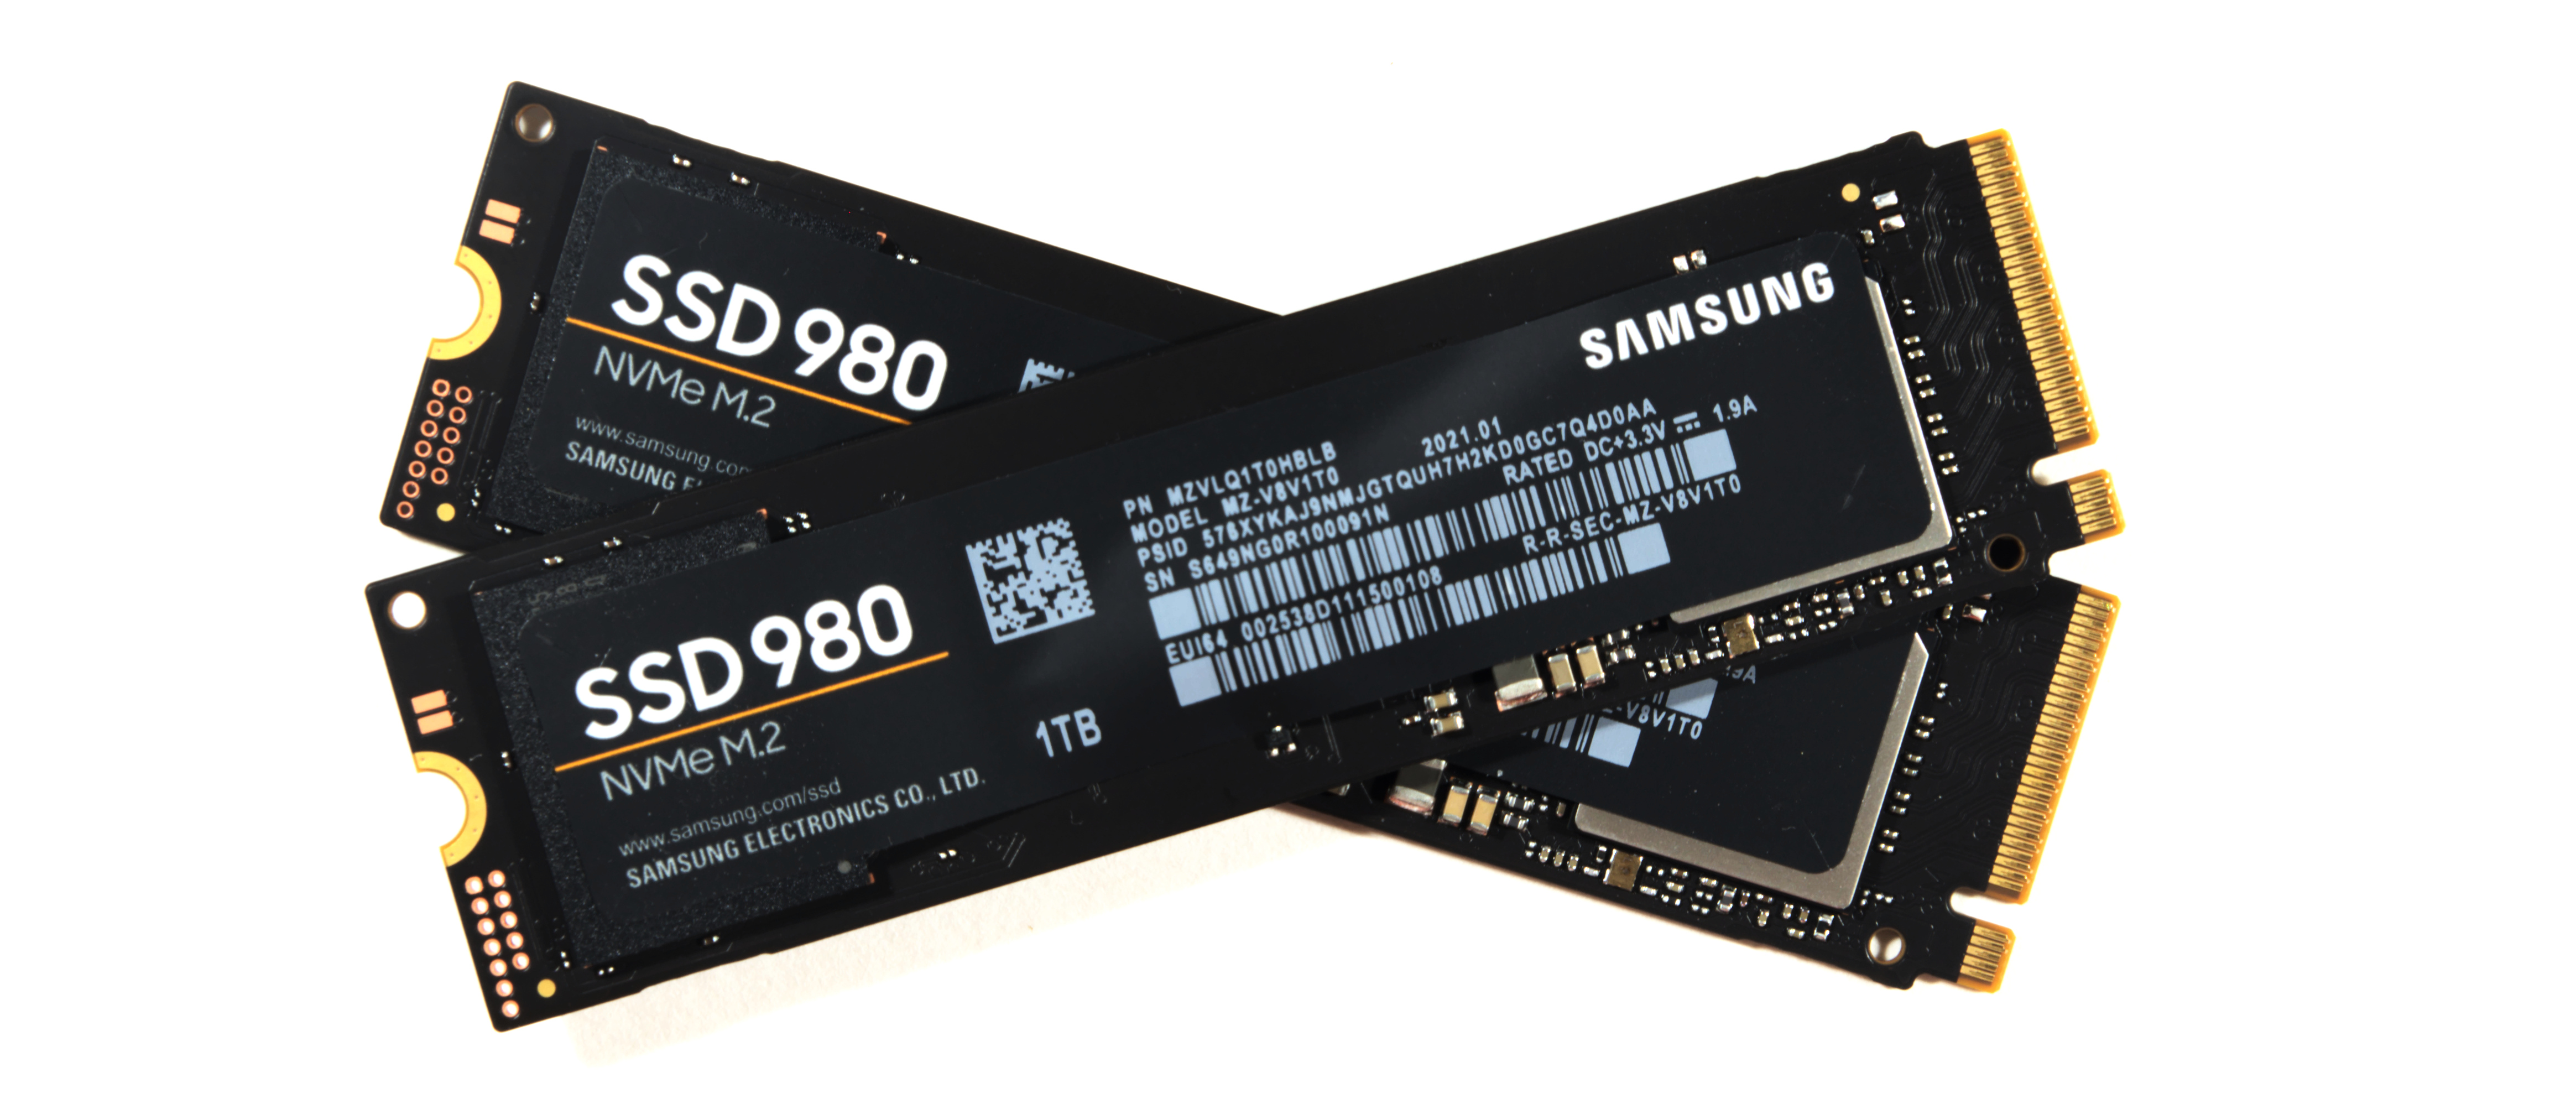 Samsung 980 is a Cost-Effective, DRAM-less PCIe Gen 3.0 M.2 SSD